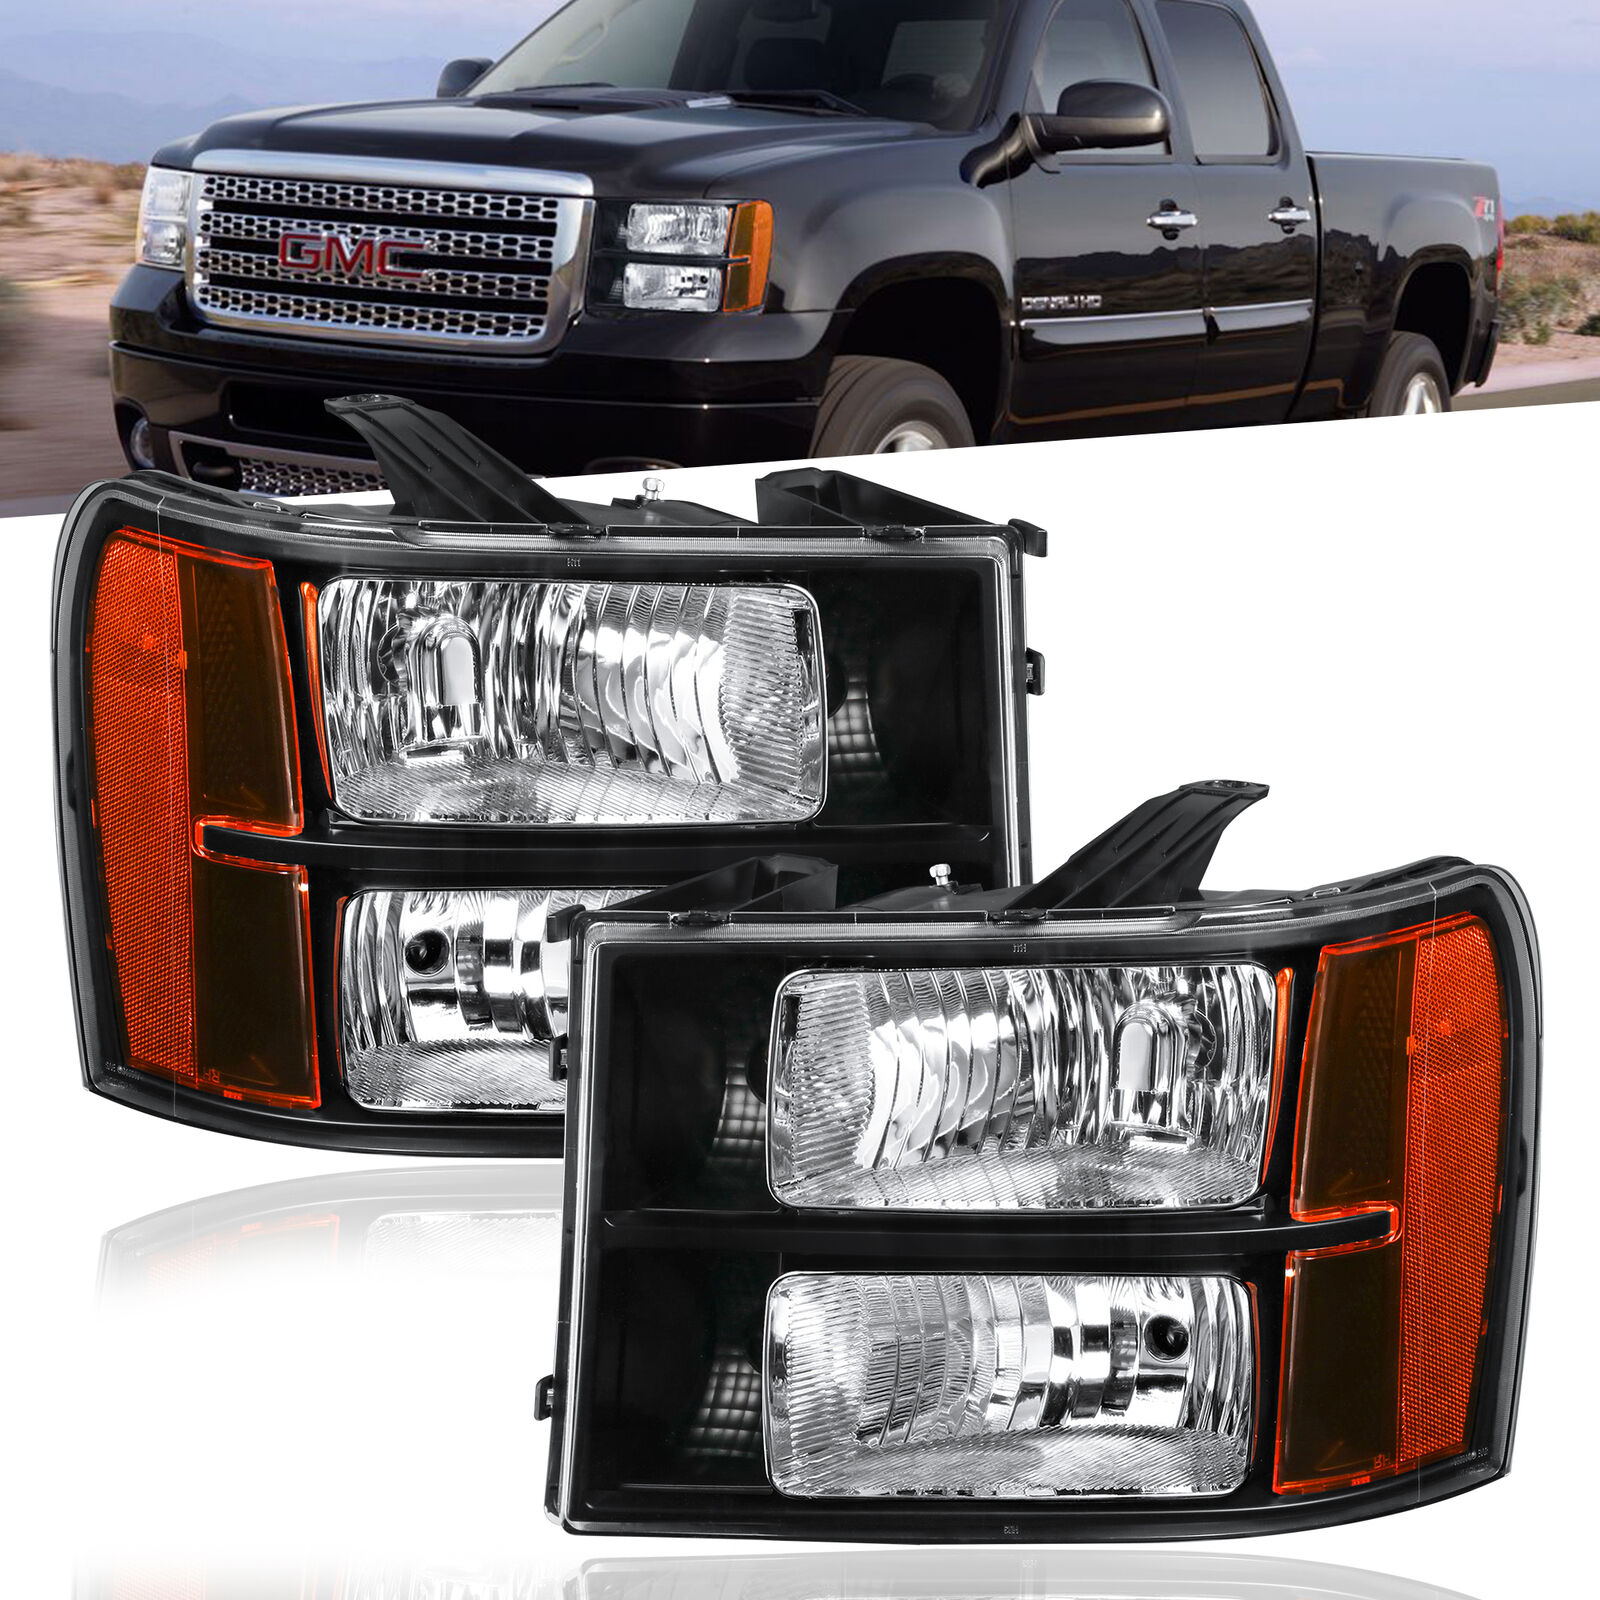 2X Front Headlights Assembly For 2007-13 GMC Sierra 1500 2007-14 2500HD 3500HD